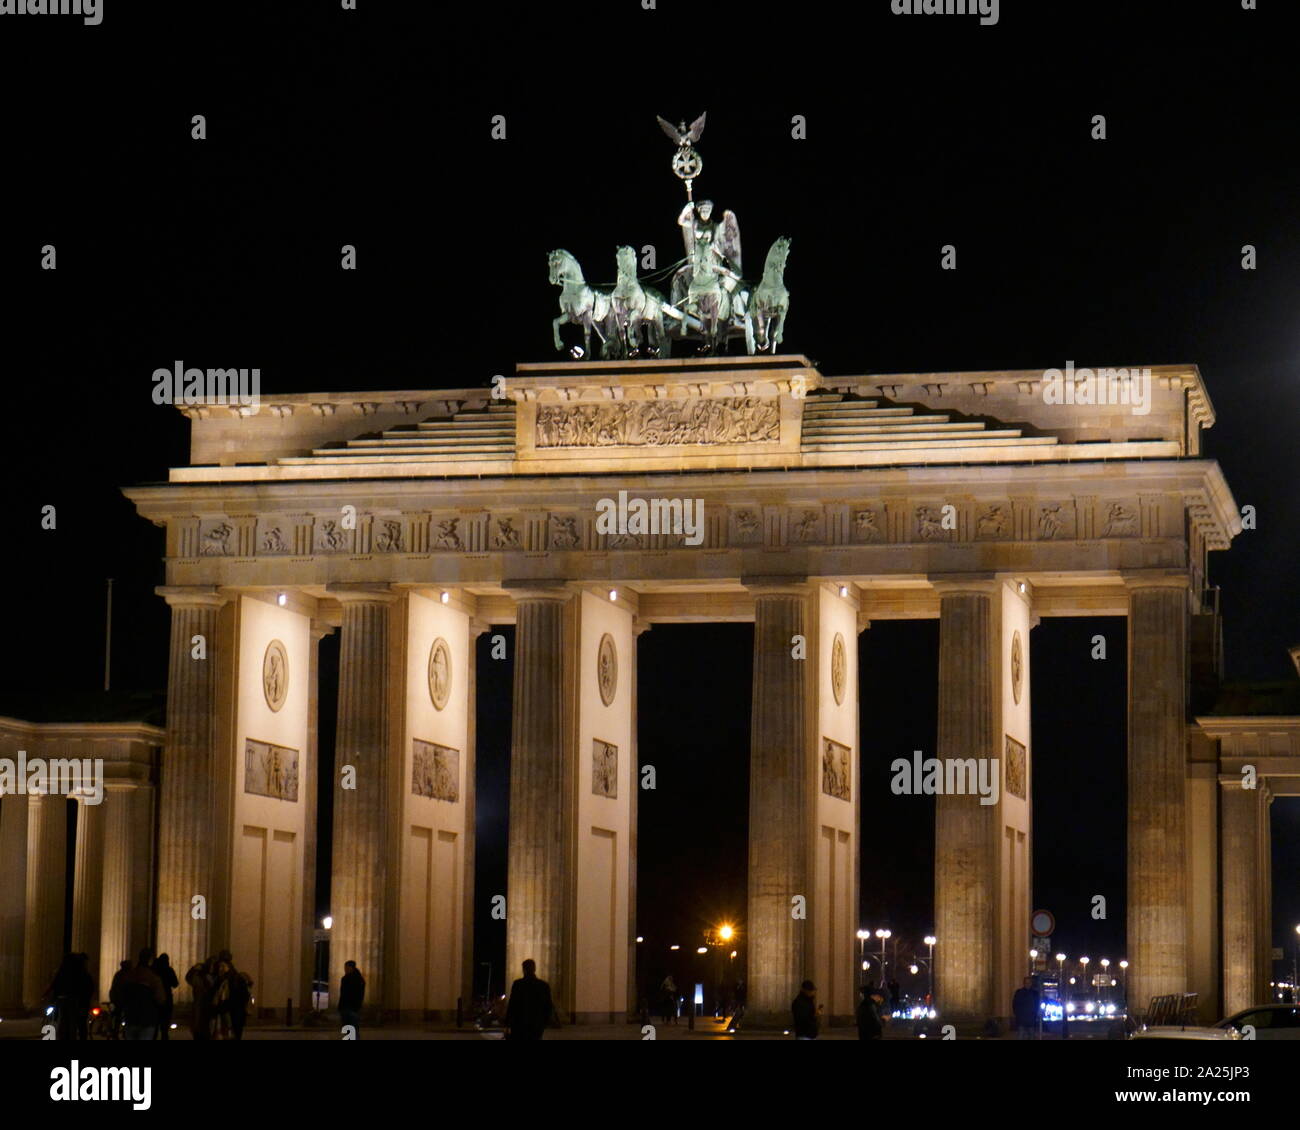 The Brandenburg Gate (Brandenburger Tor), 18th-century neoclassical monument in Berlin, built on the orders of Prussian king Frederick William II after the (temporarily) successful restoration of order during the early Batavian Revolution. One of the best-known landmarks of Germany Stock Photo